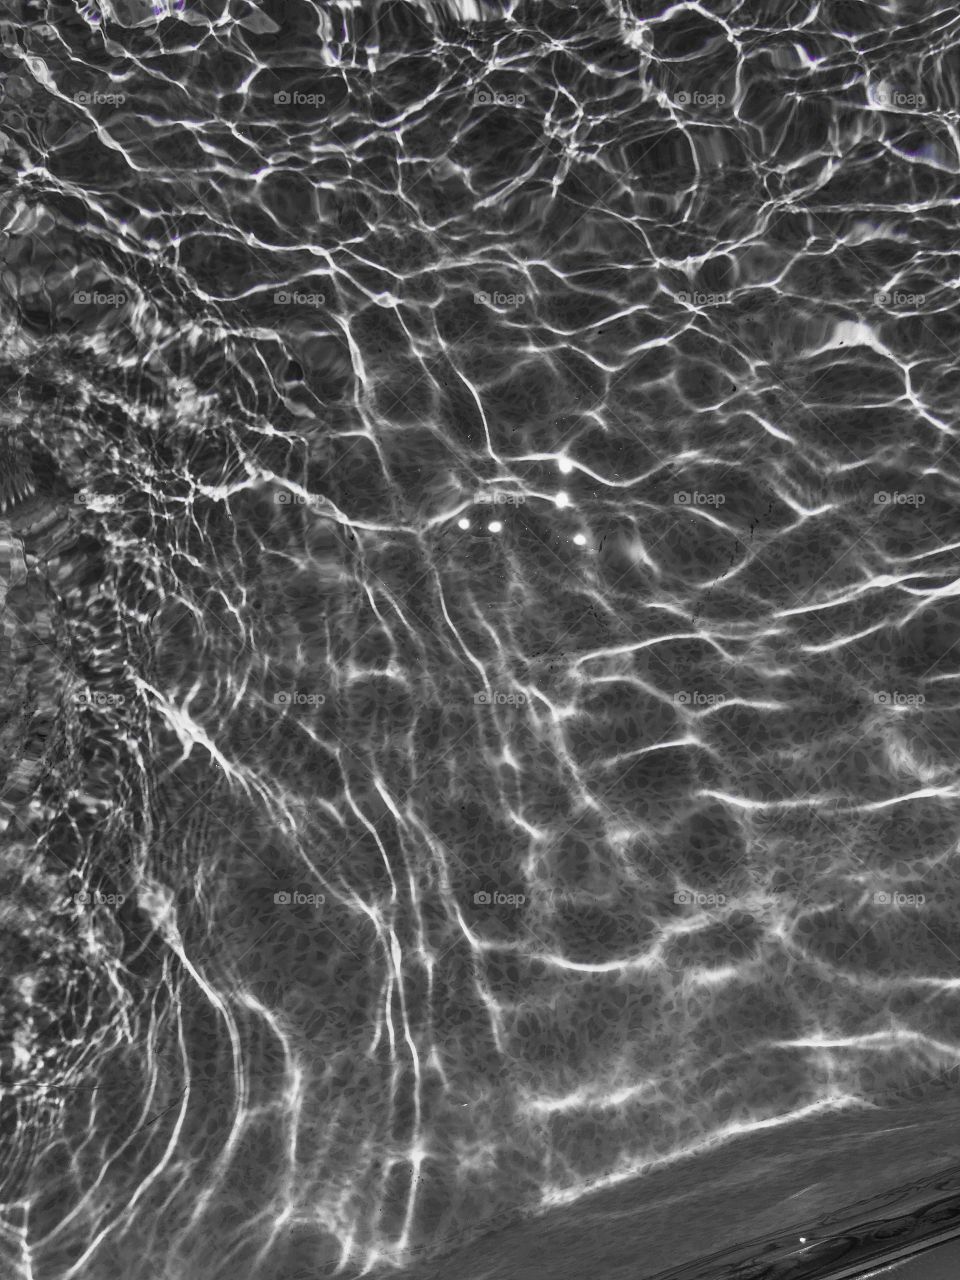 Ripples in the swimming pool, let your imagination go...